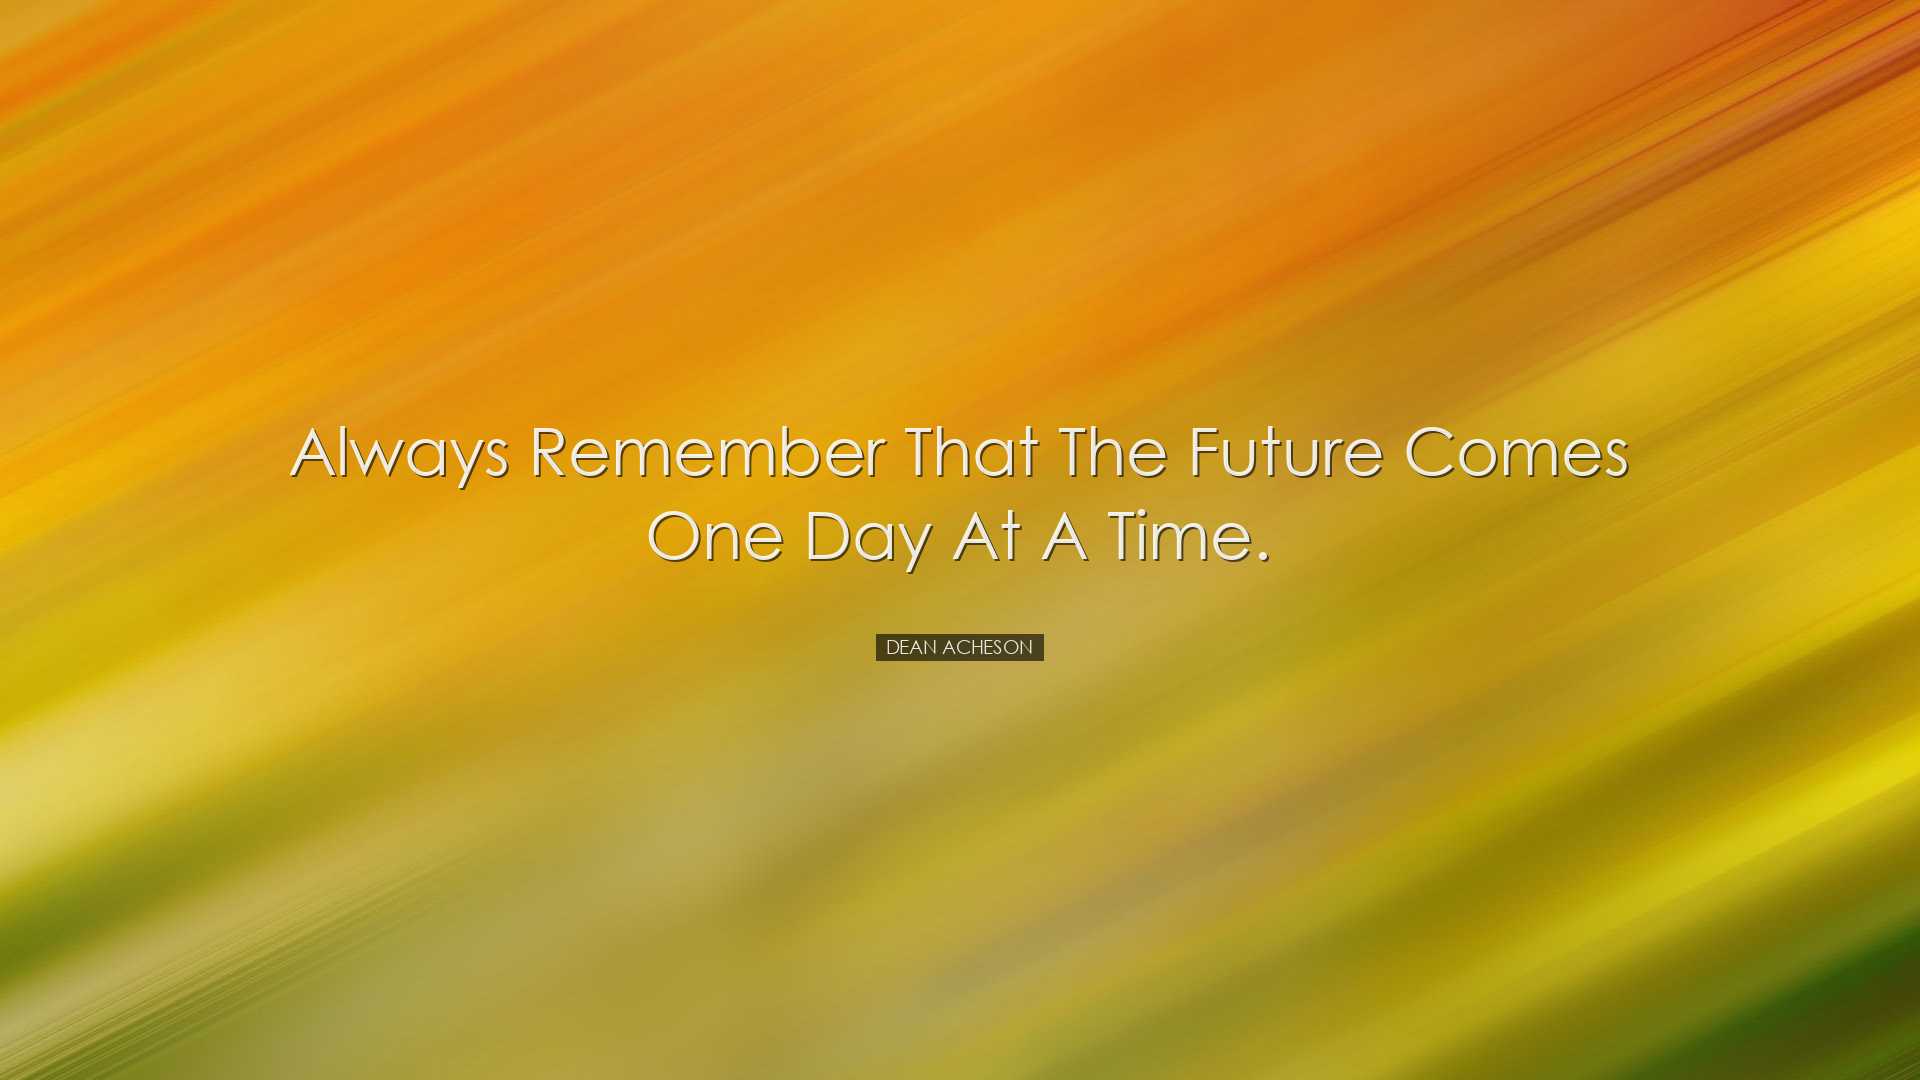 Always remember that the future comes one day at a time. - Dean Ac